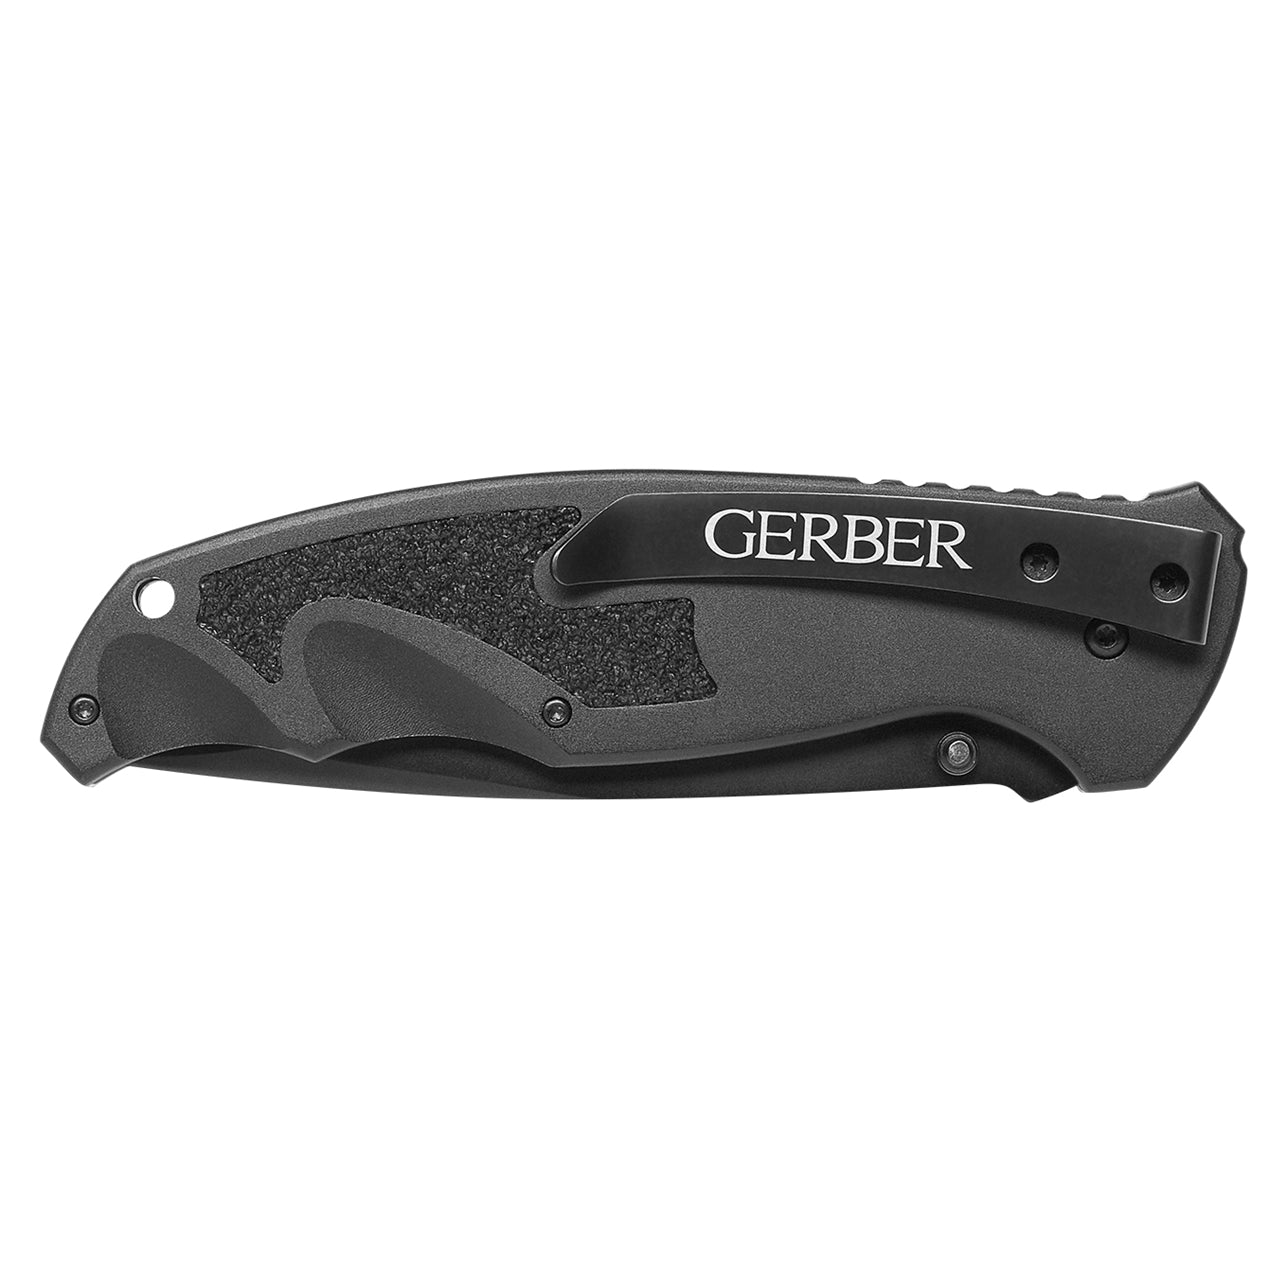 Gerber Answer 3.25 Fast Assisted Open Knife